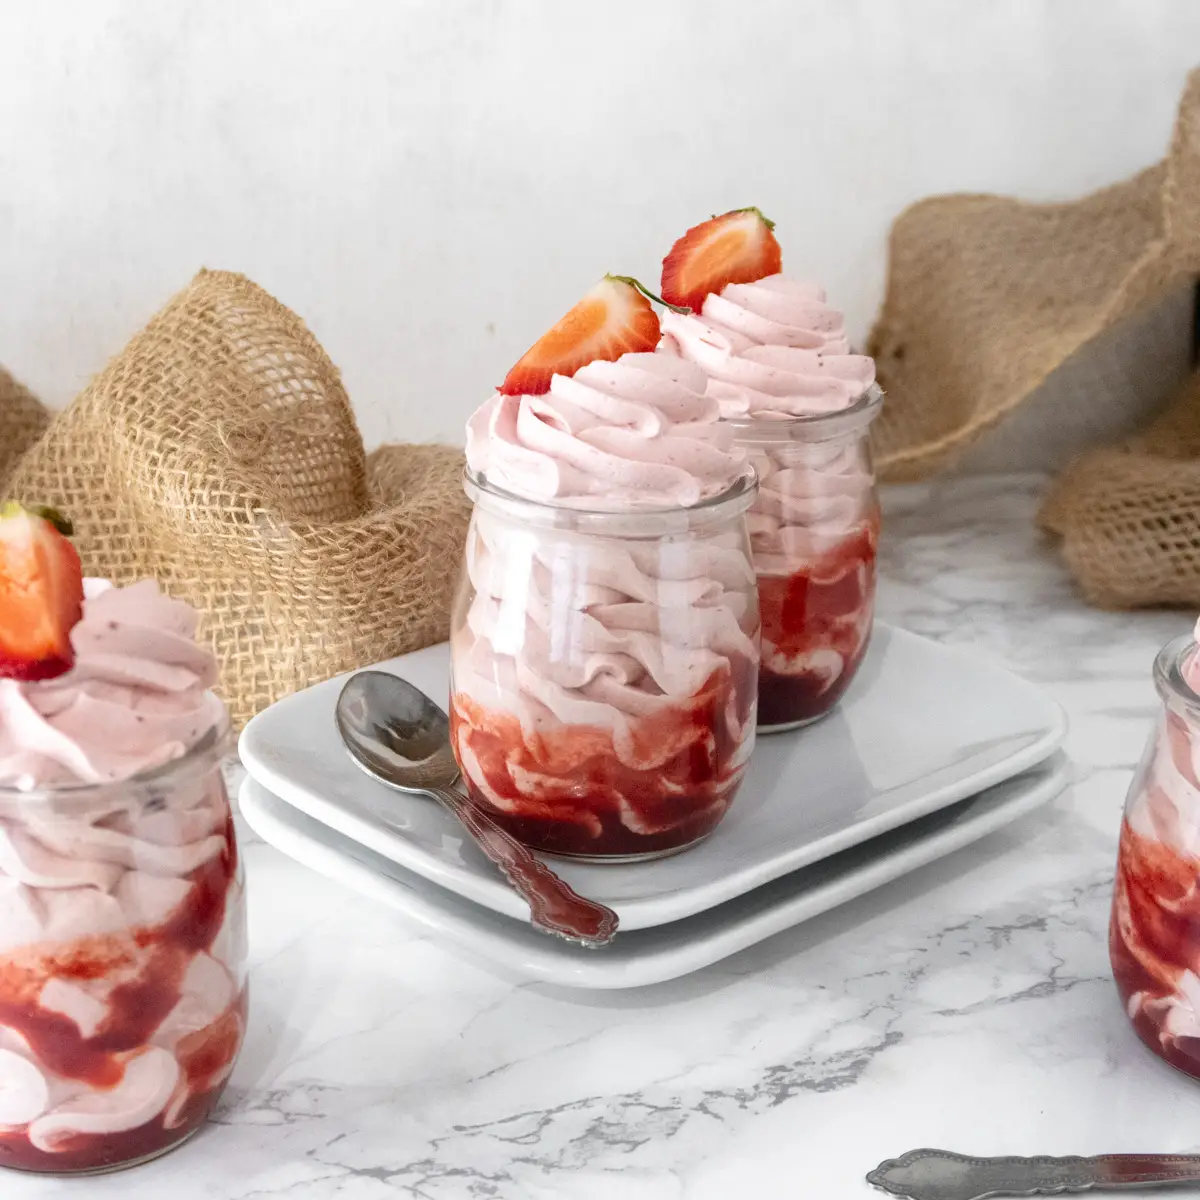 Vegan white chocolate and strawberry mousse pipped into jars that are resting on plates.